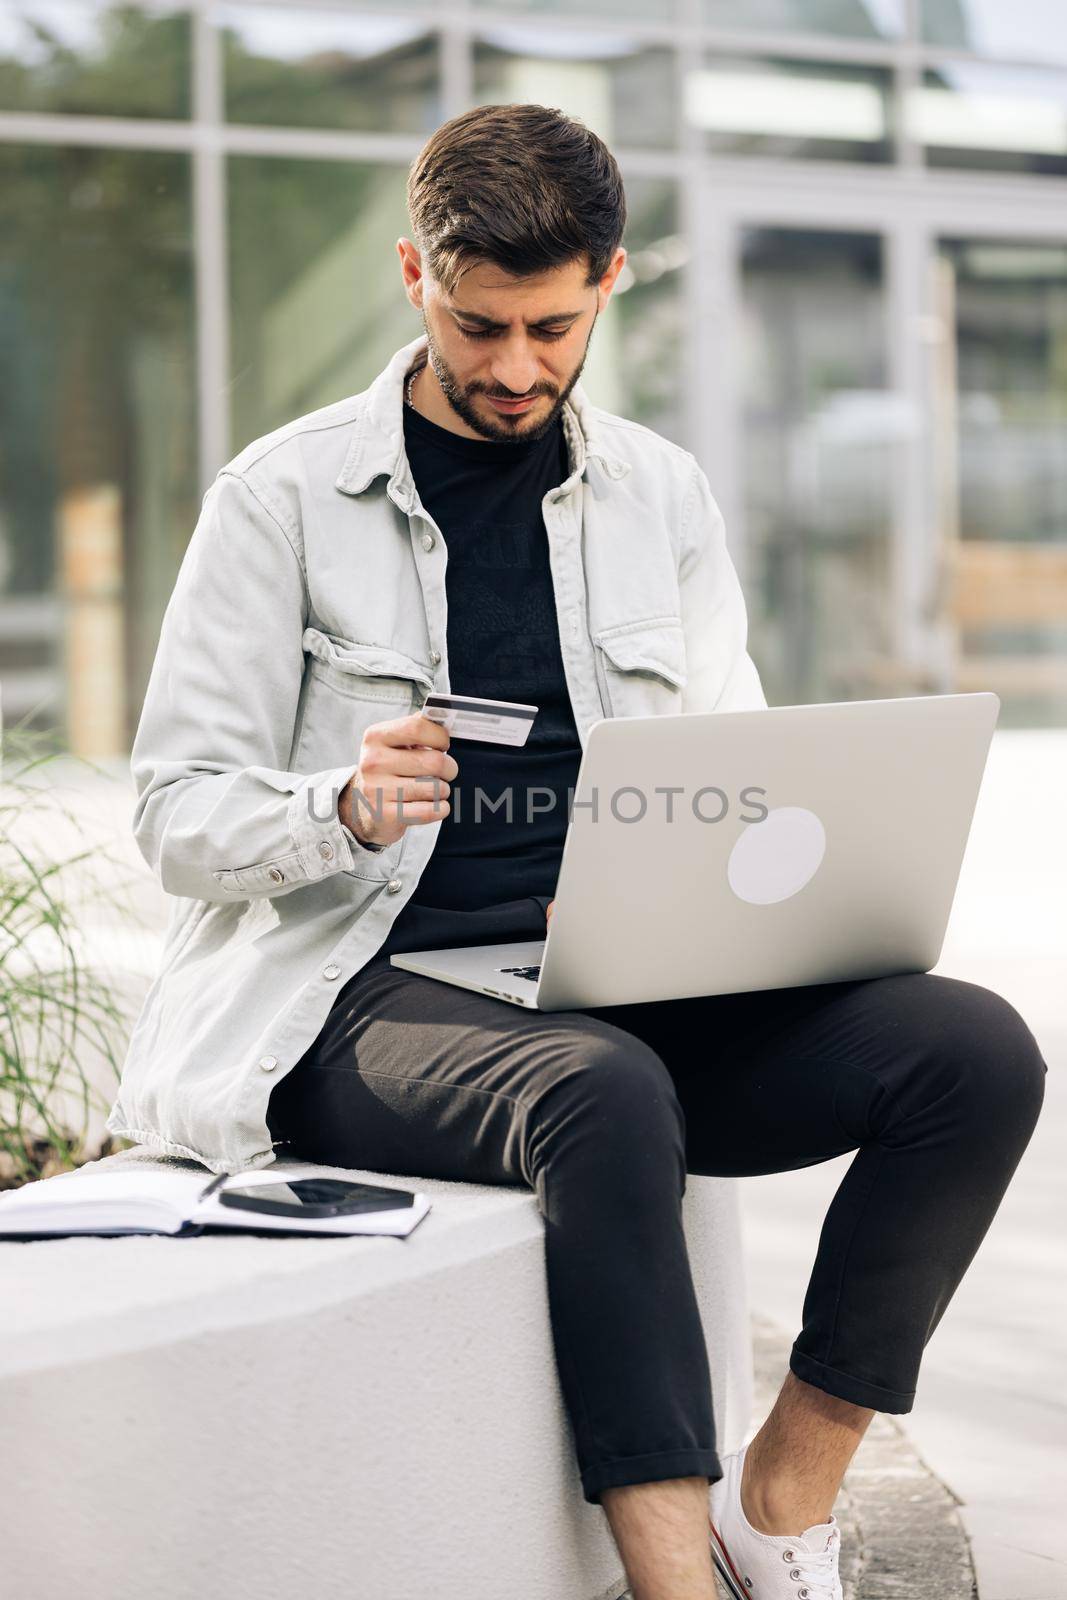 Male buyer paying on website via e commerce service sitting on bench near modern office. Man customer using computer e-banking service making secure online payment holding credit card in hand.